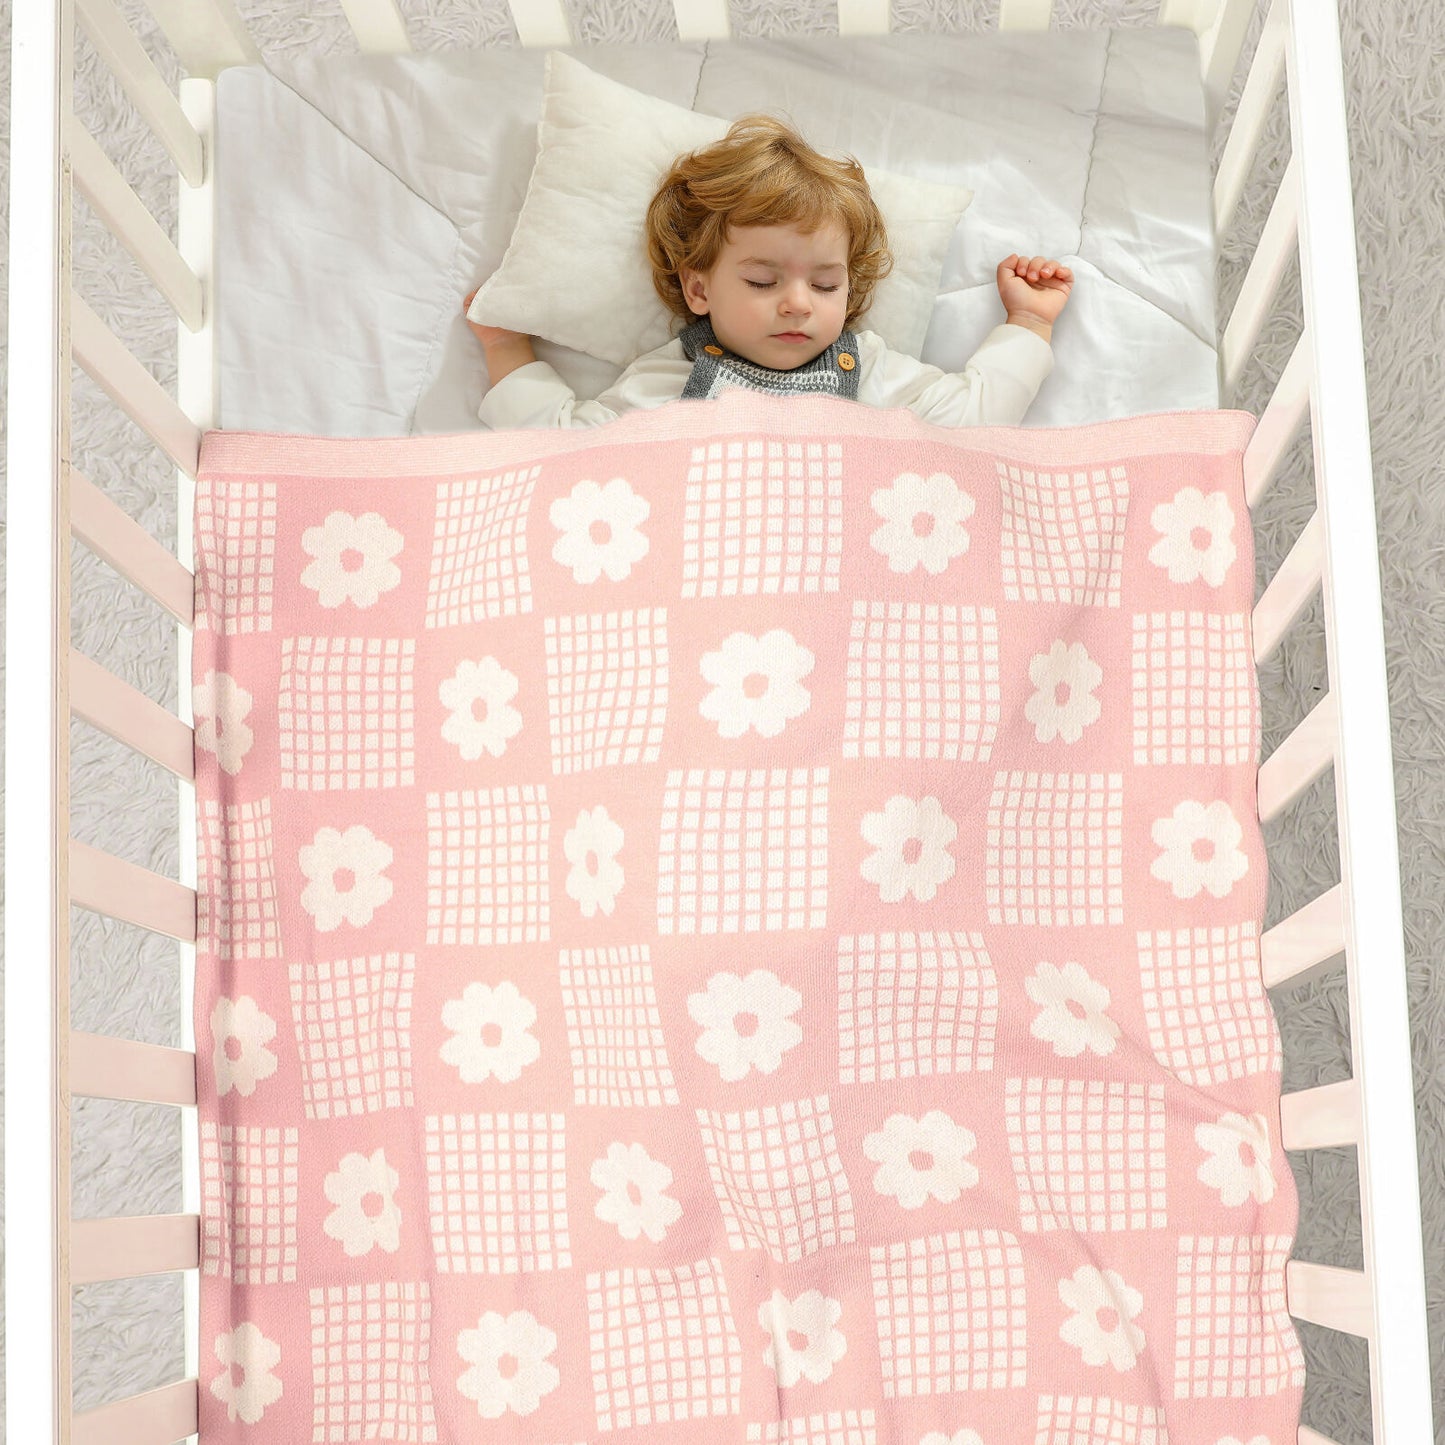 Flower Checkered Knit Blanket - That's So Darling